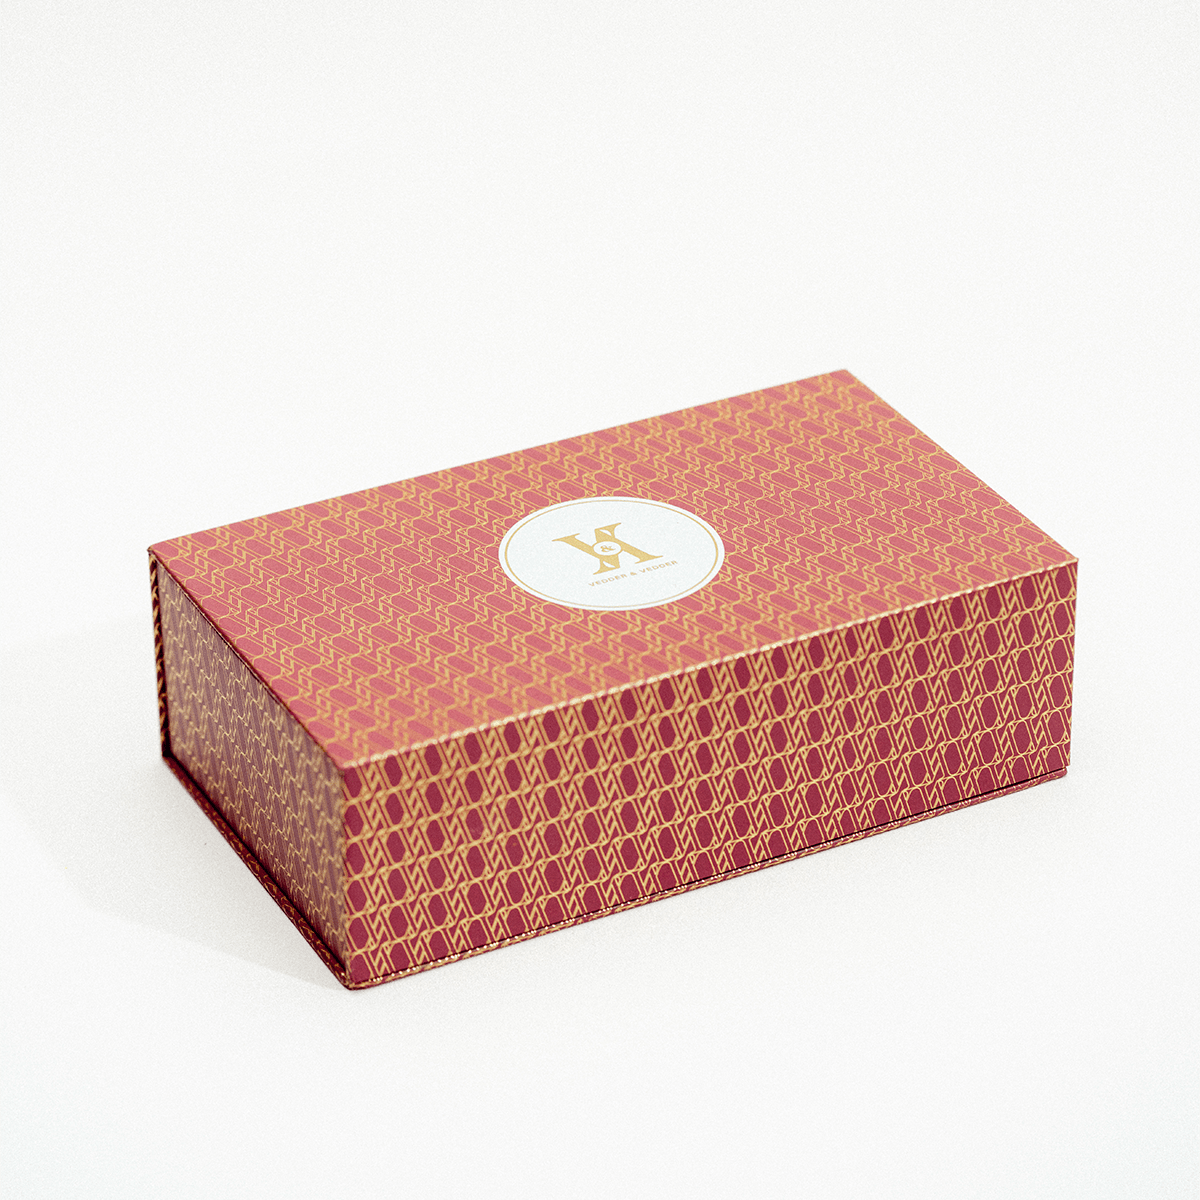 Pink and gold giftwrap